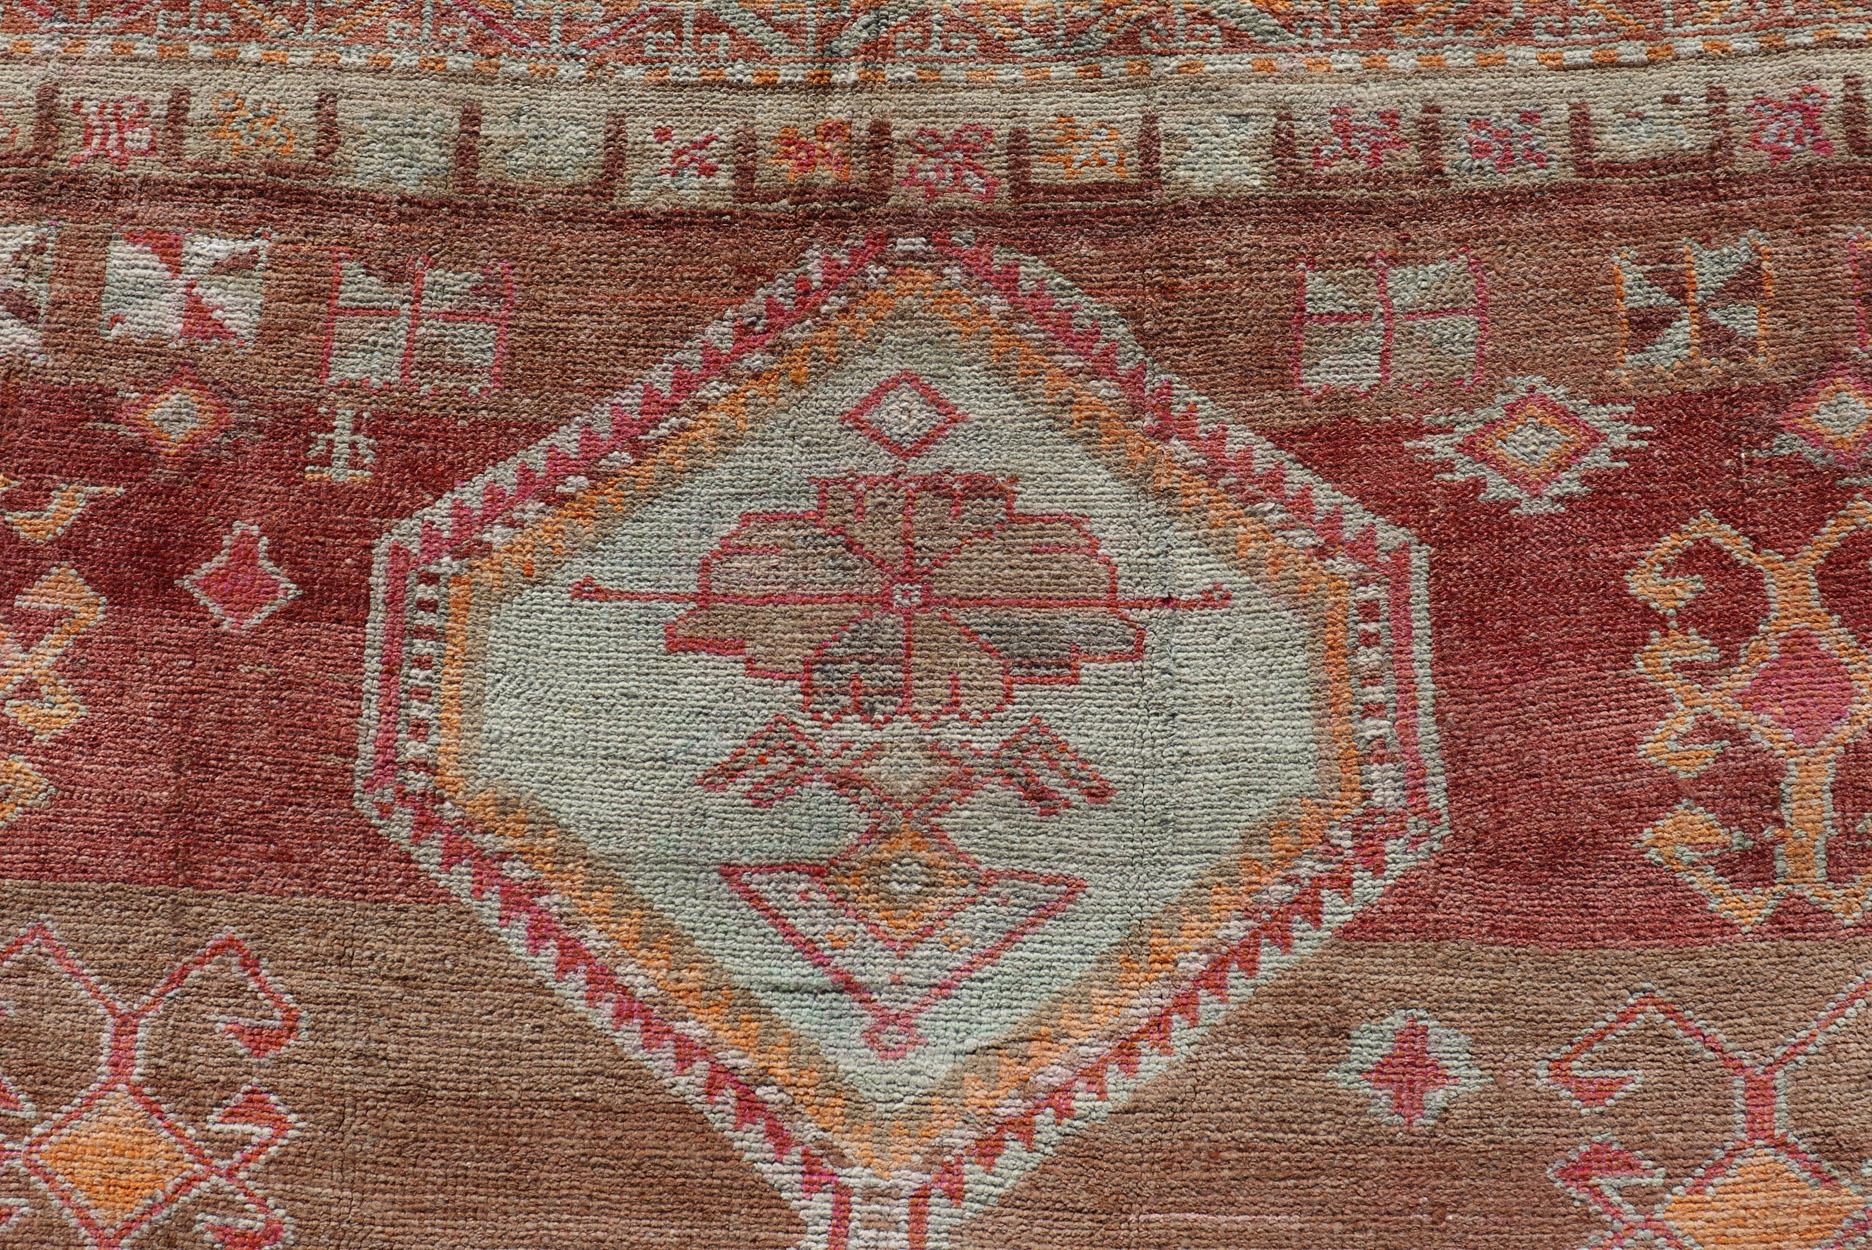 Long Rug, Vintage Turkish Gallery Rug with Tribal Design in Variegated Red In Excellent Condition For Sale In Atlanta, GA